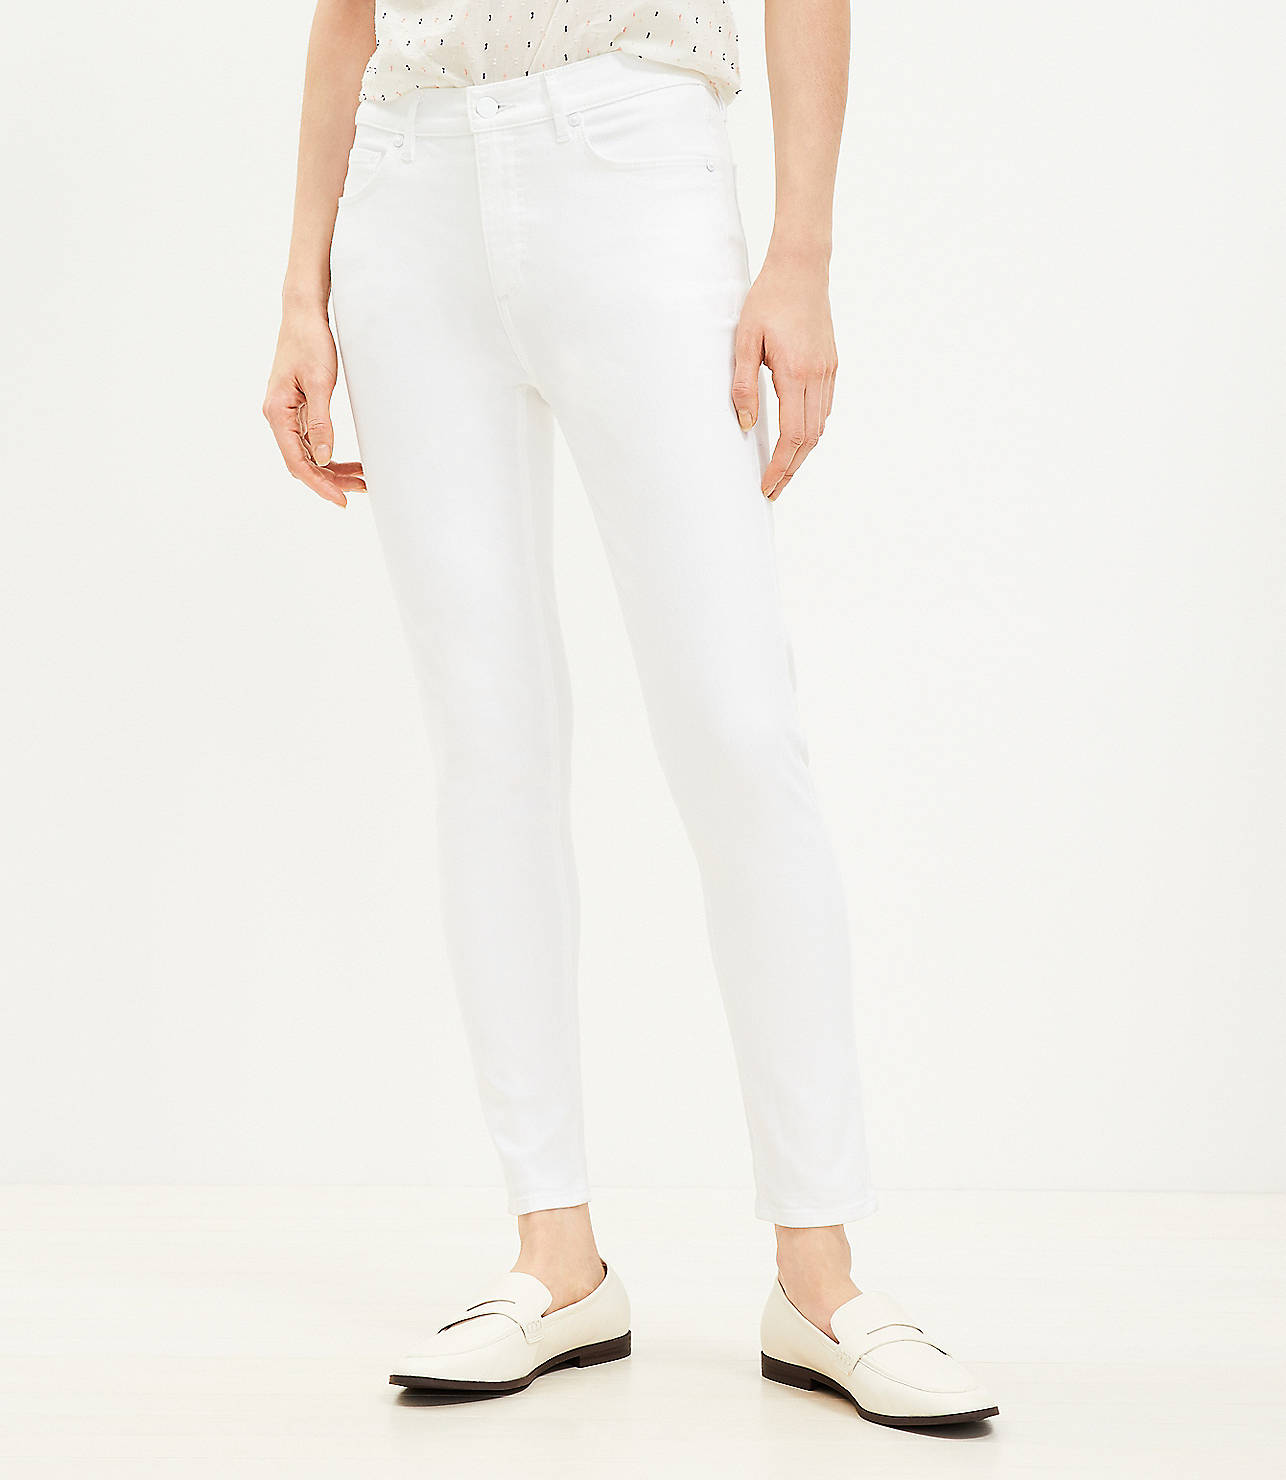 Petite Mid Rise Skinny Jeans in White